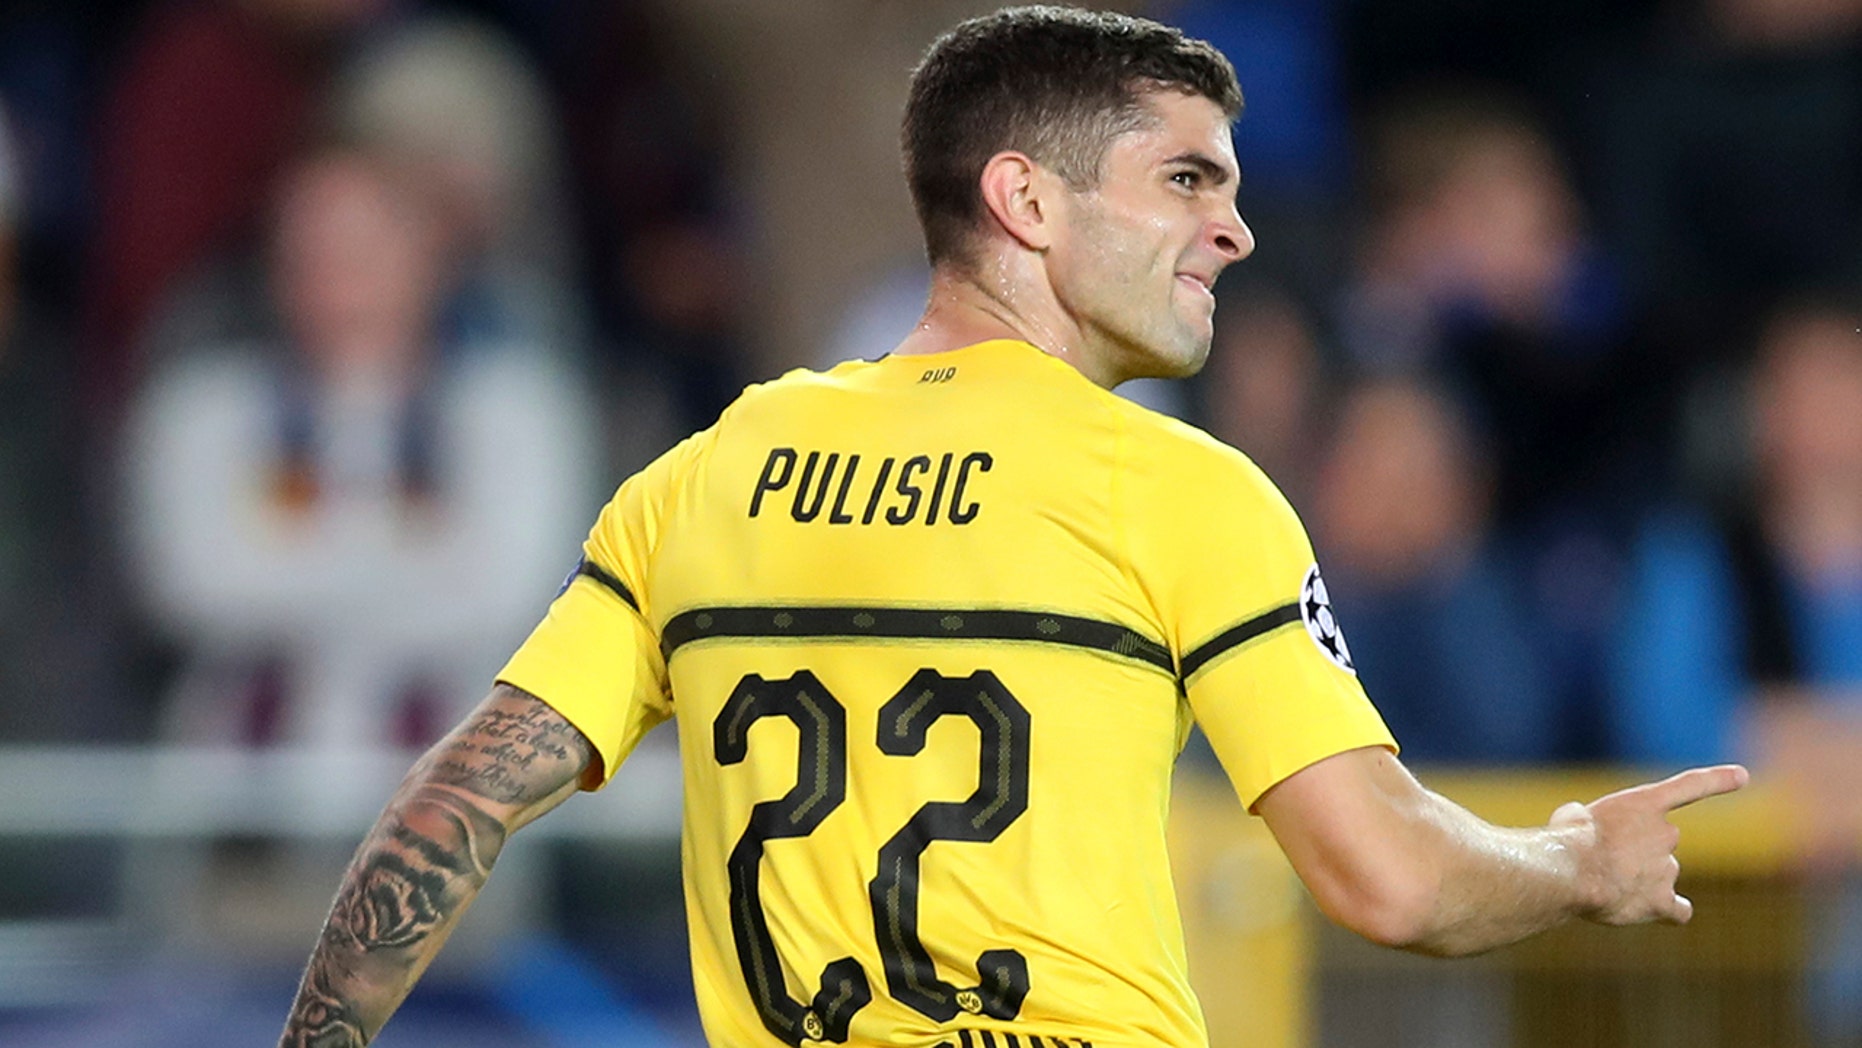 Christian Pulisic, 20, becomes highest-paid American soccer player in